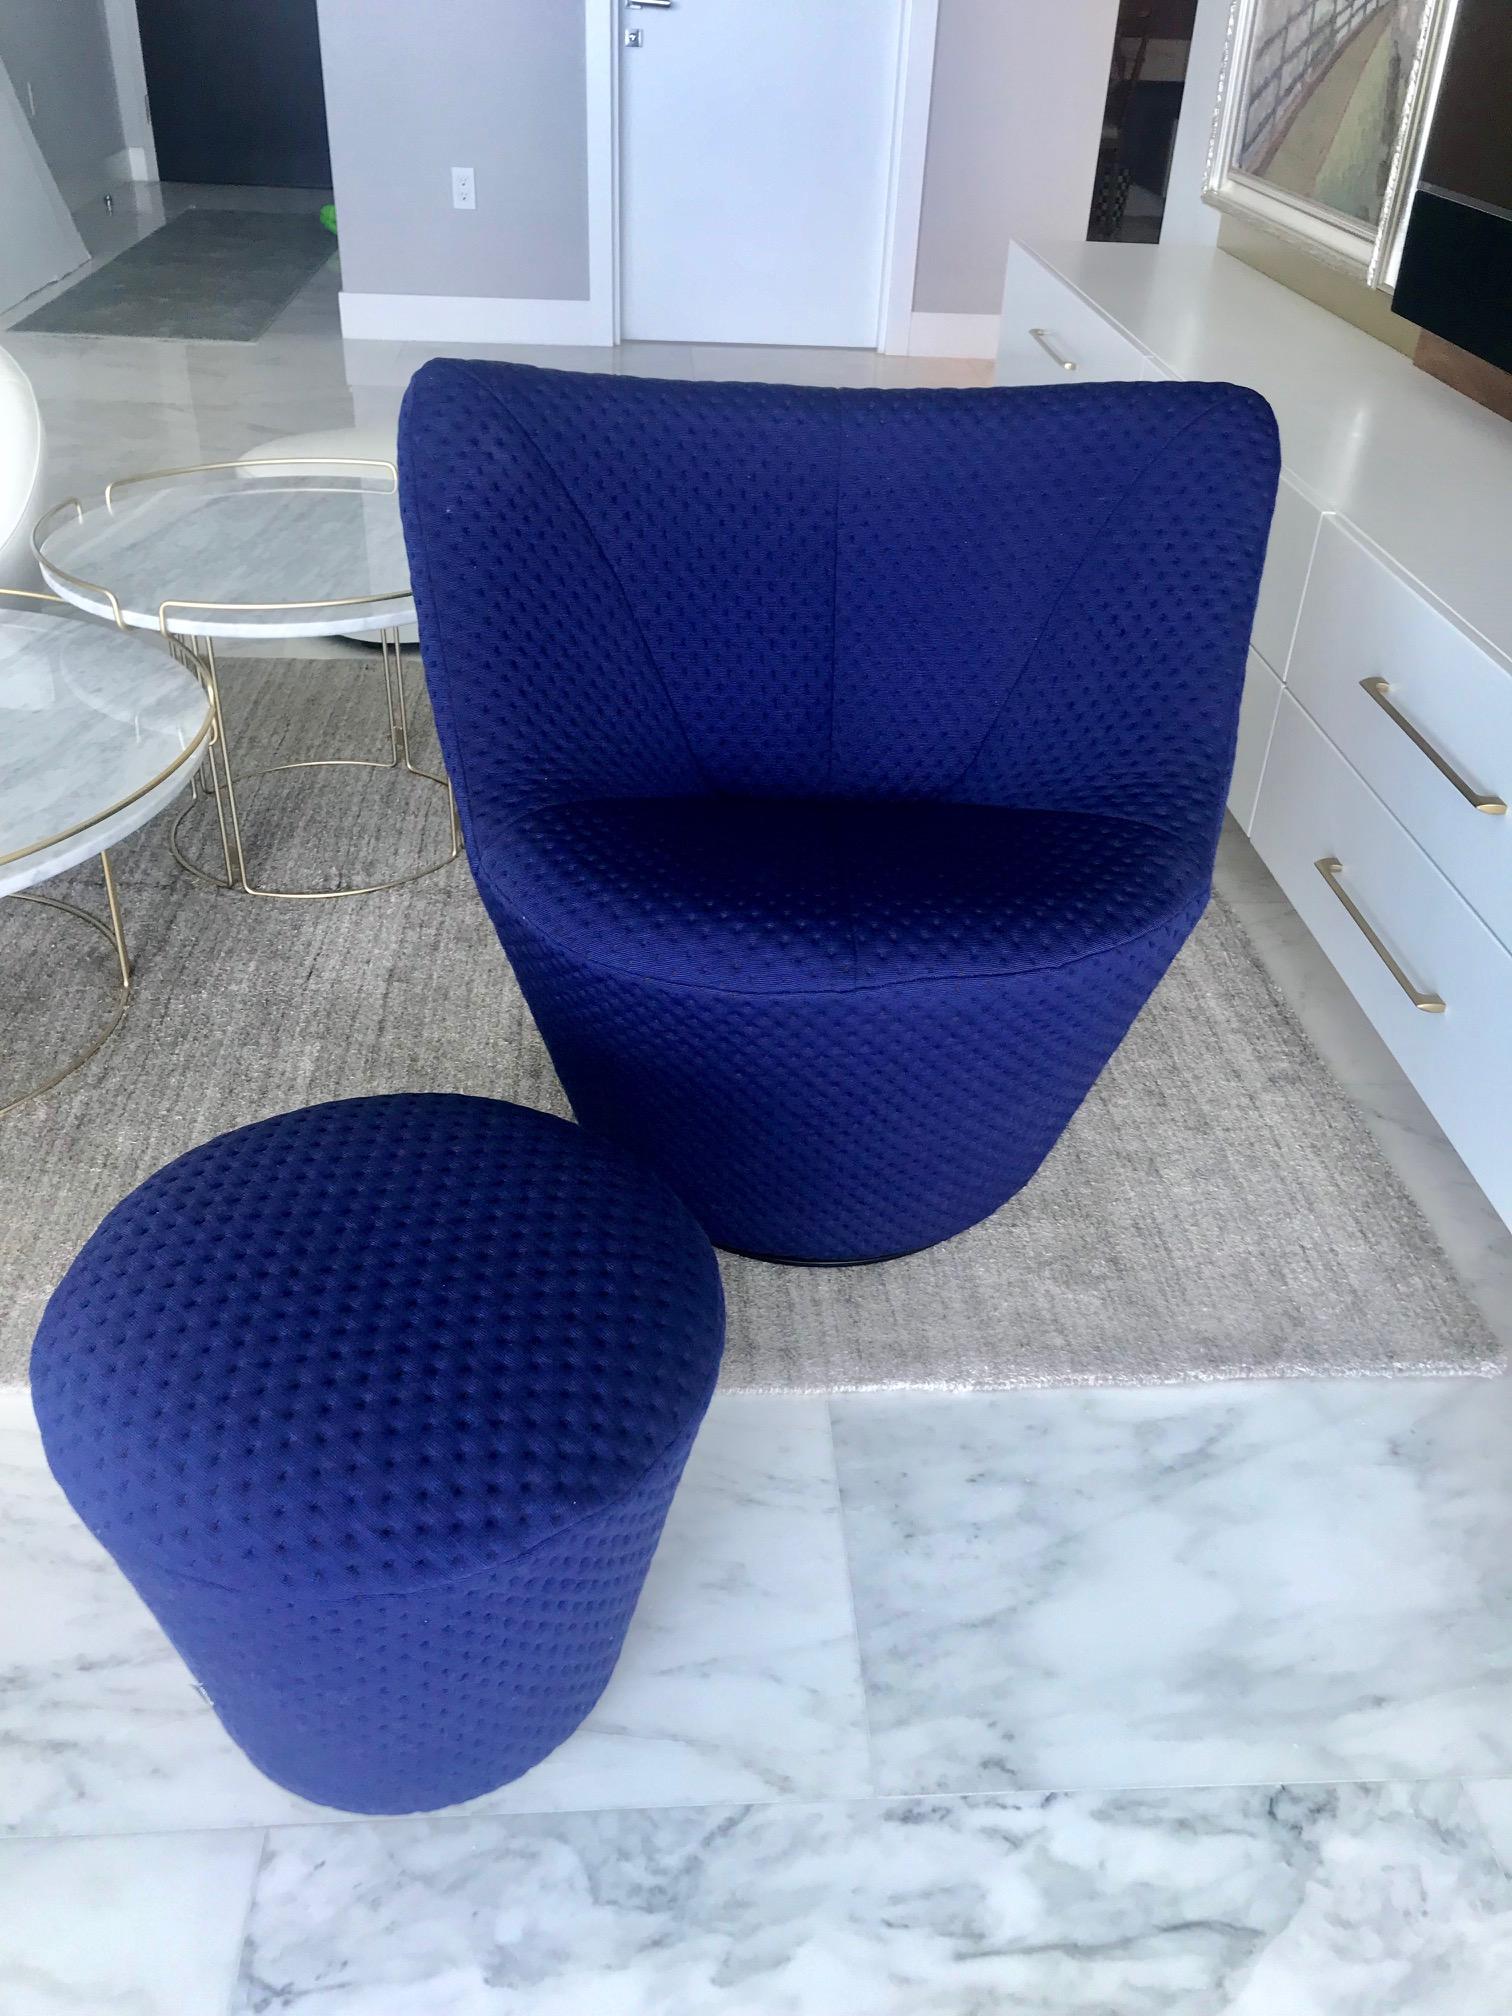 Outstanding swivel lounge chair and matching ottoman designed by Pierre Paulin. Modernist design with elegant curves throughout. Offers exceptional comfort with low back design and swivel base feature. Custom woven upholstery in vibrant mood indigo